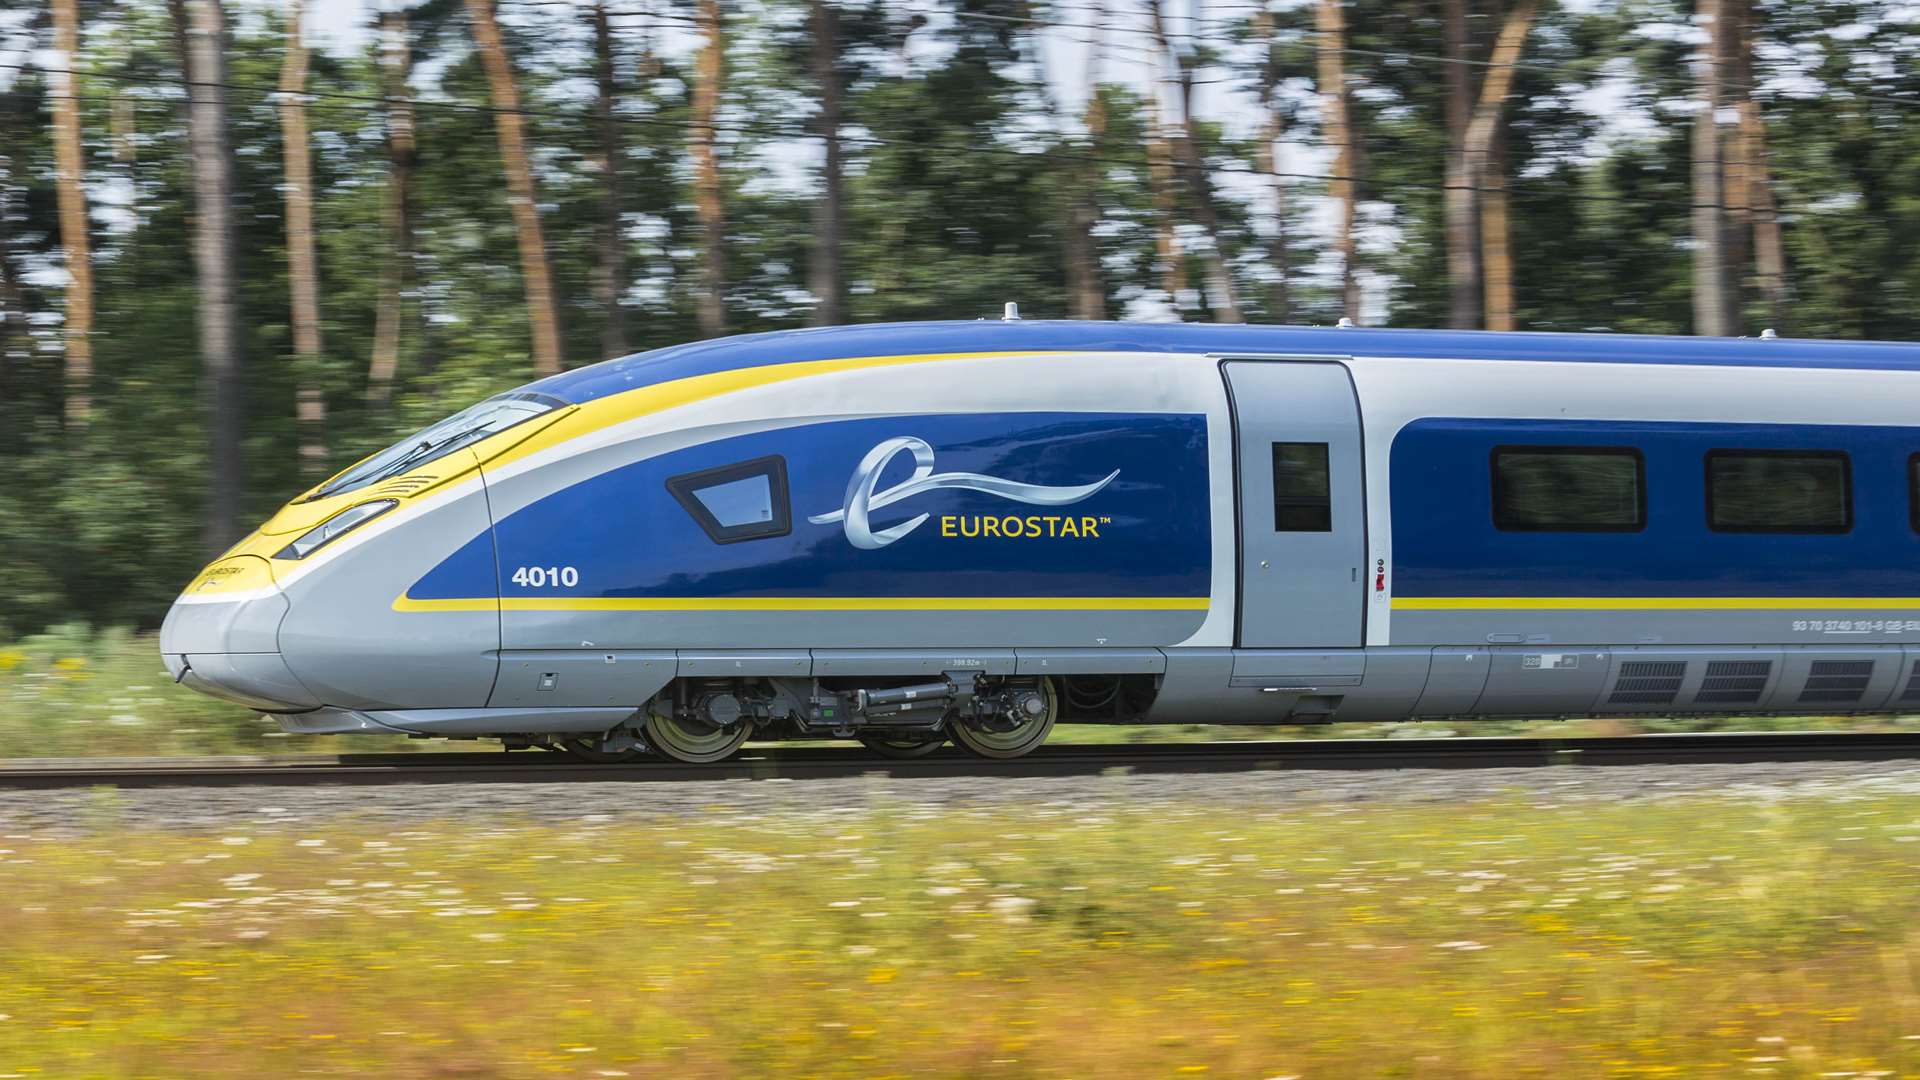 A new Eurostar route has been announced